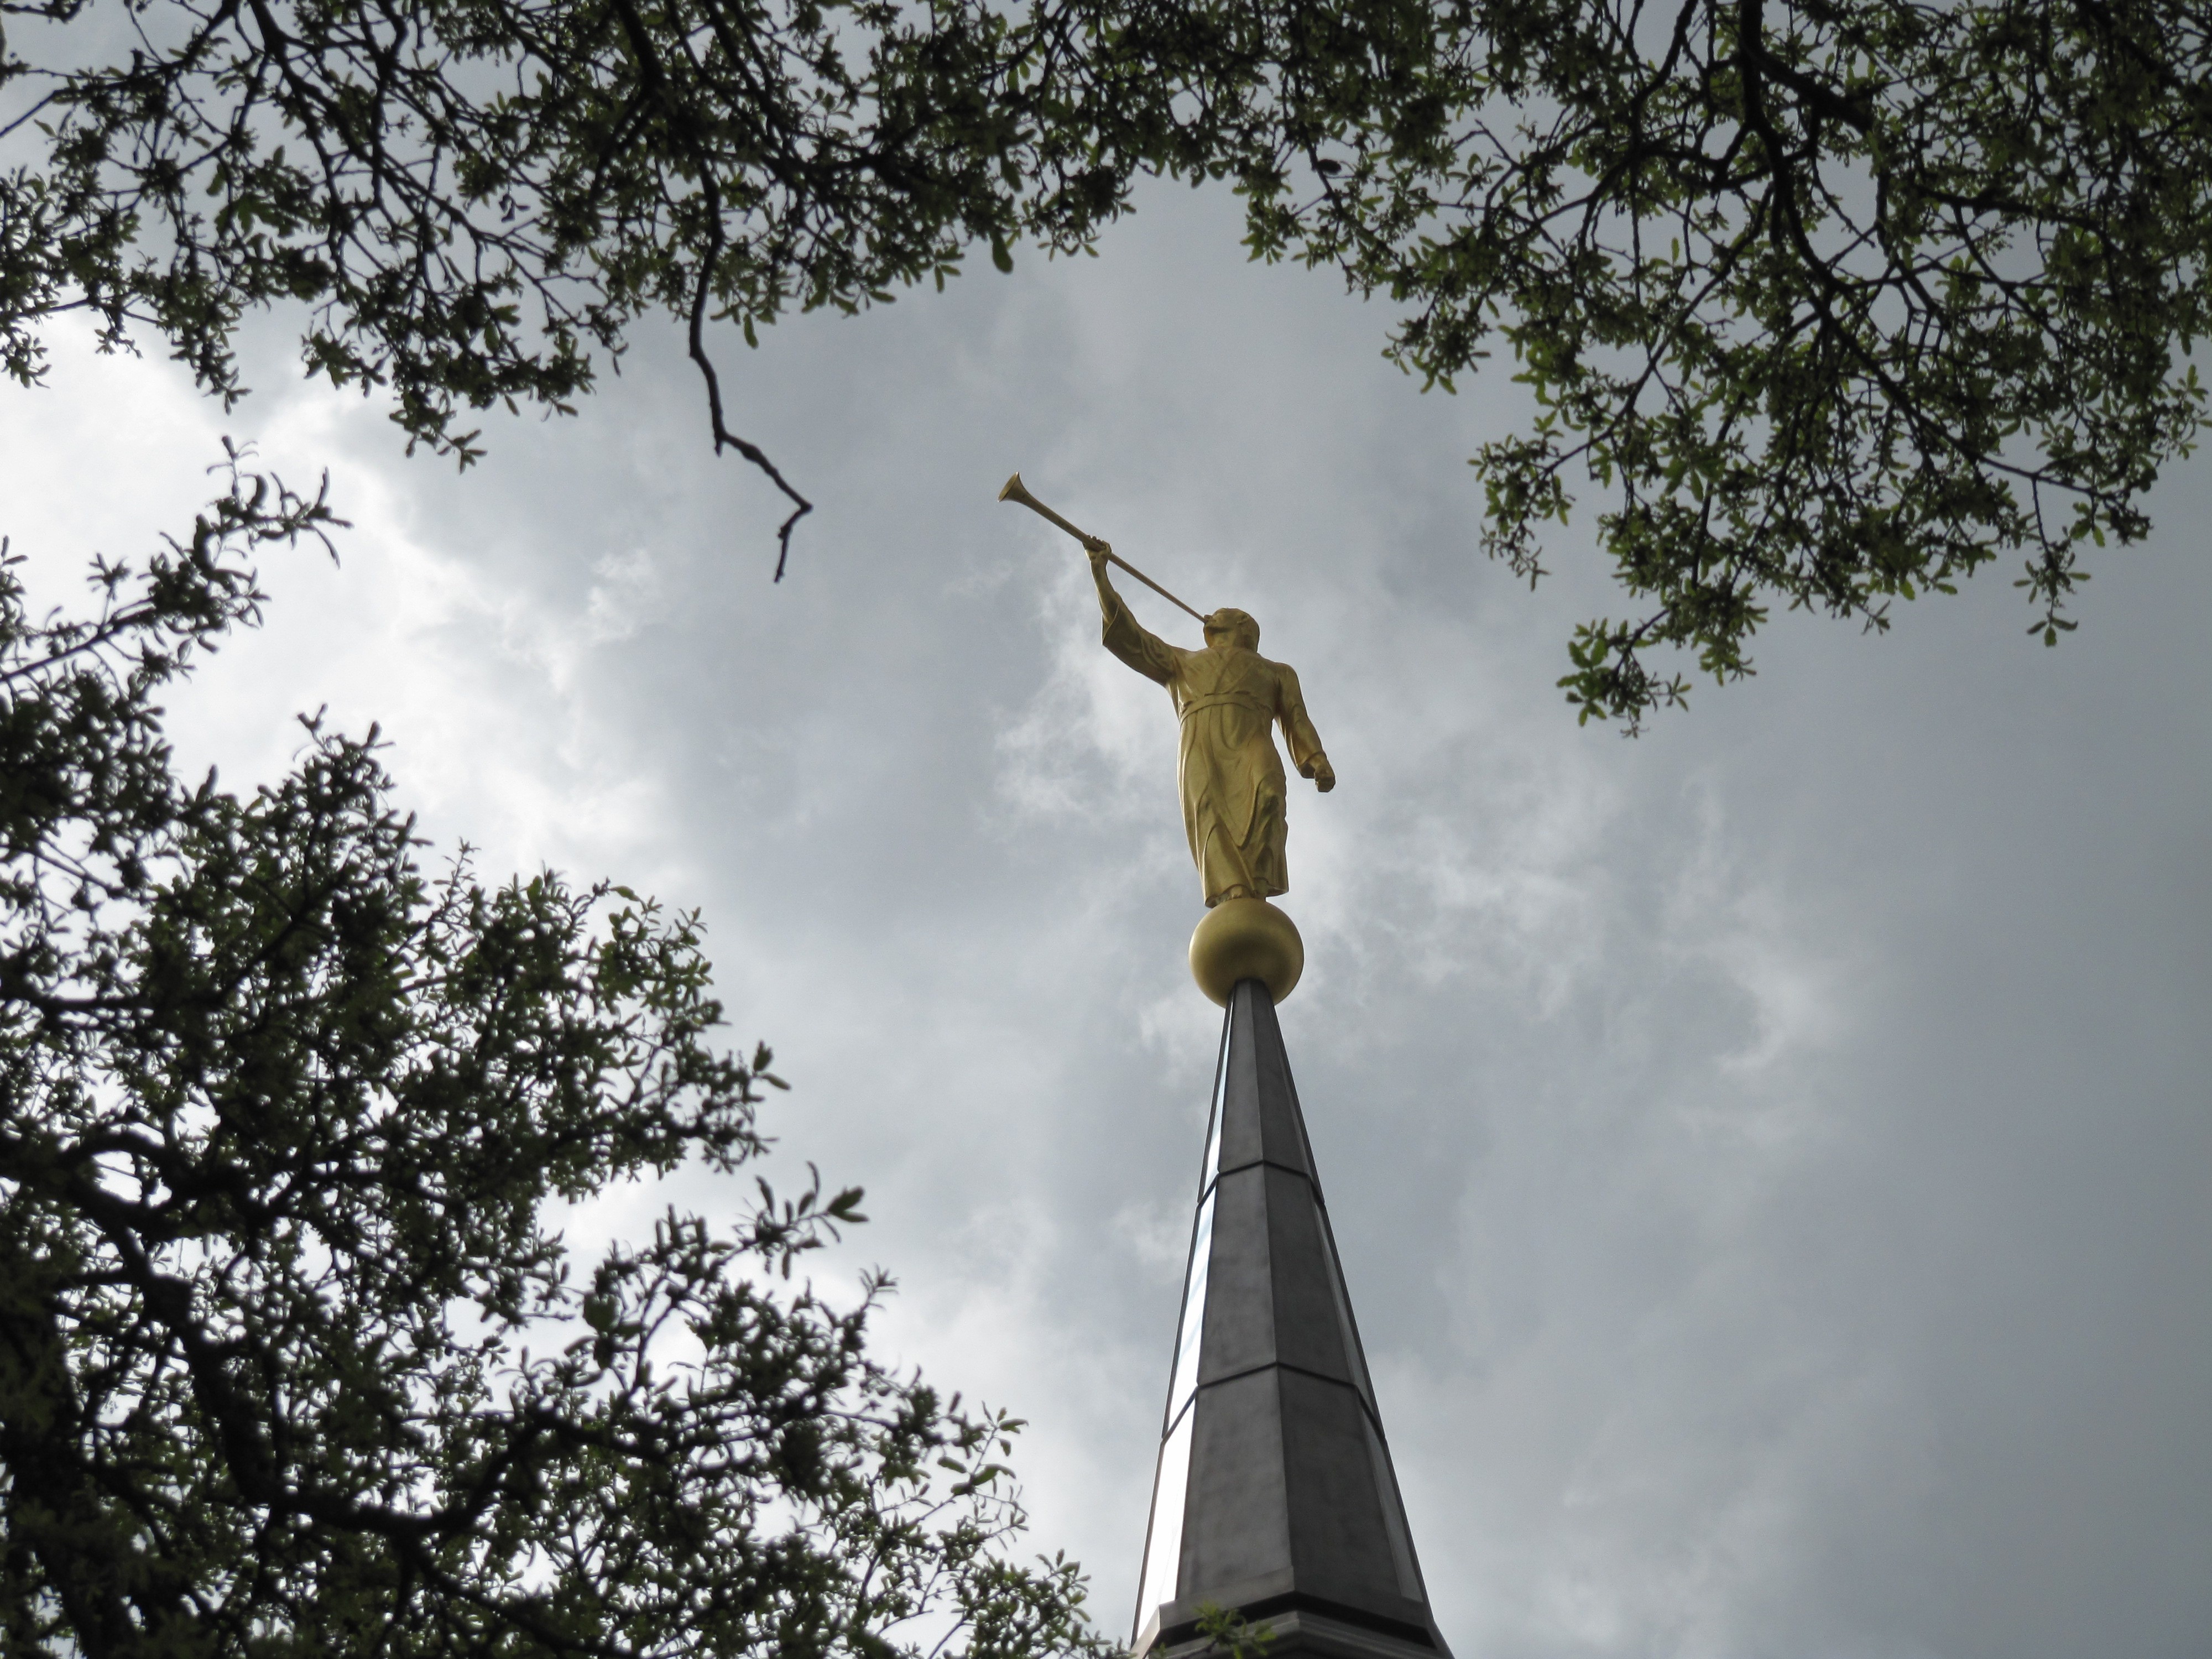 An image of the golden angel Moroni statue atop the spire of the Sacramento California Temple, with the leaves of trees seen nearby.